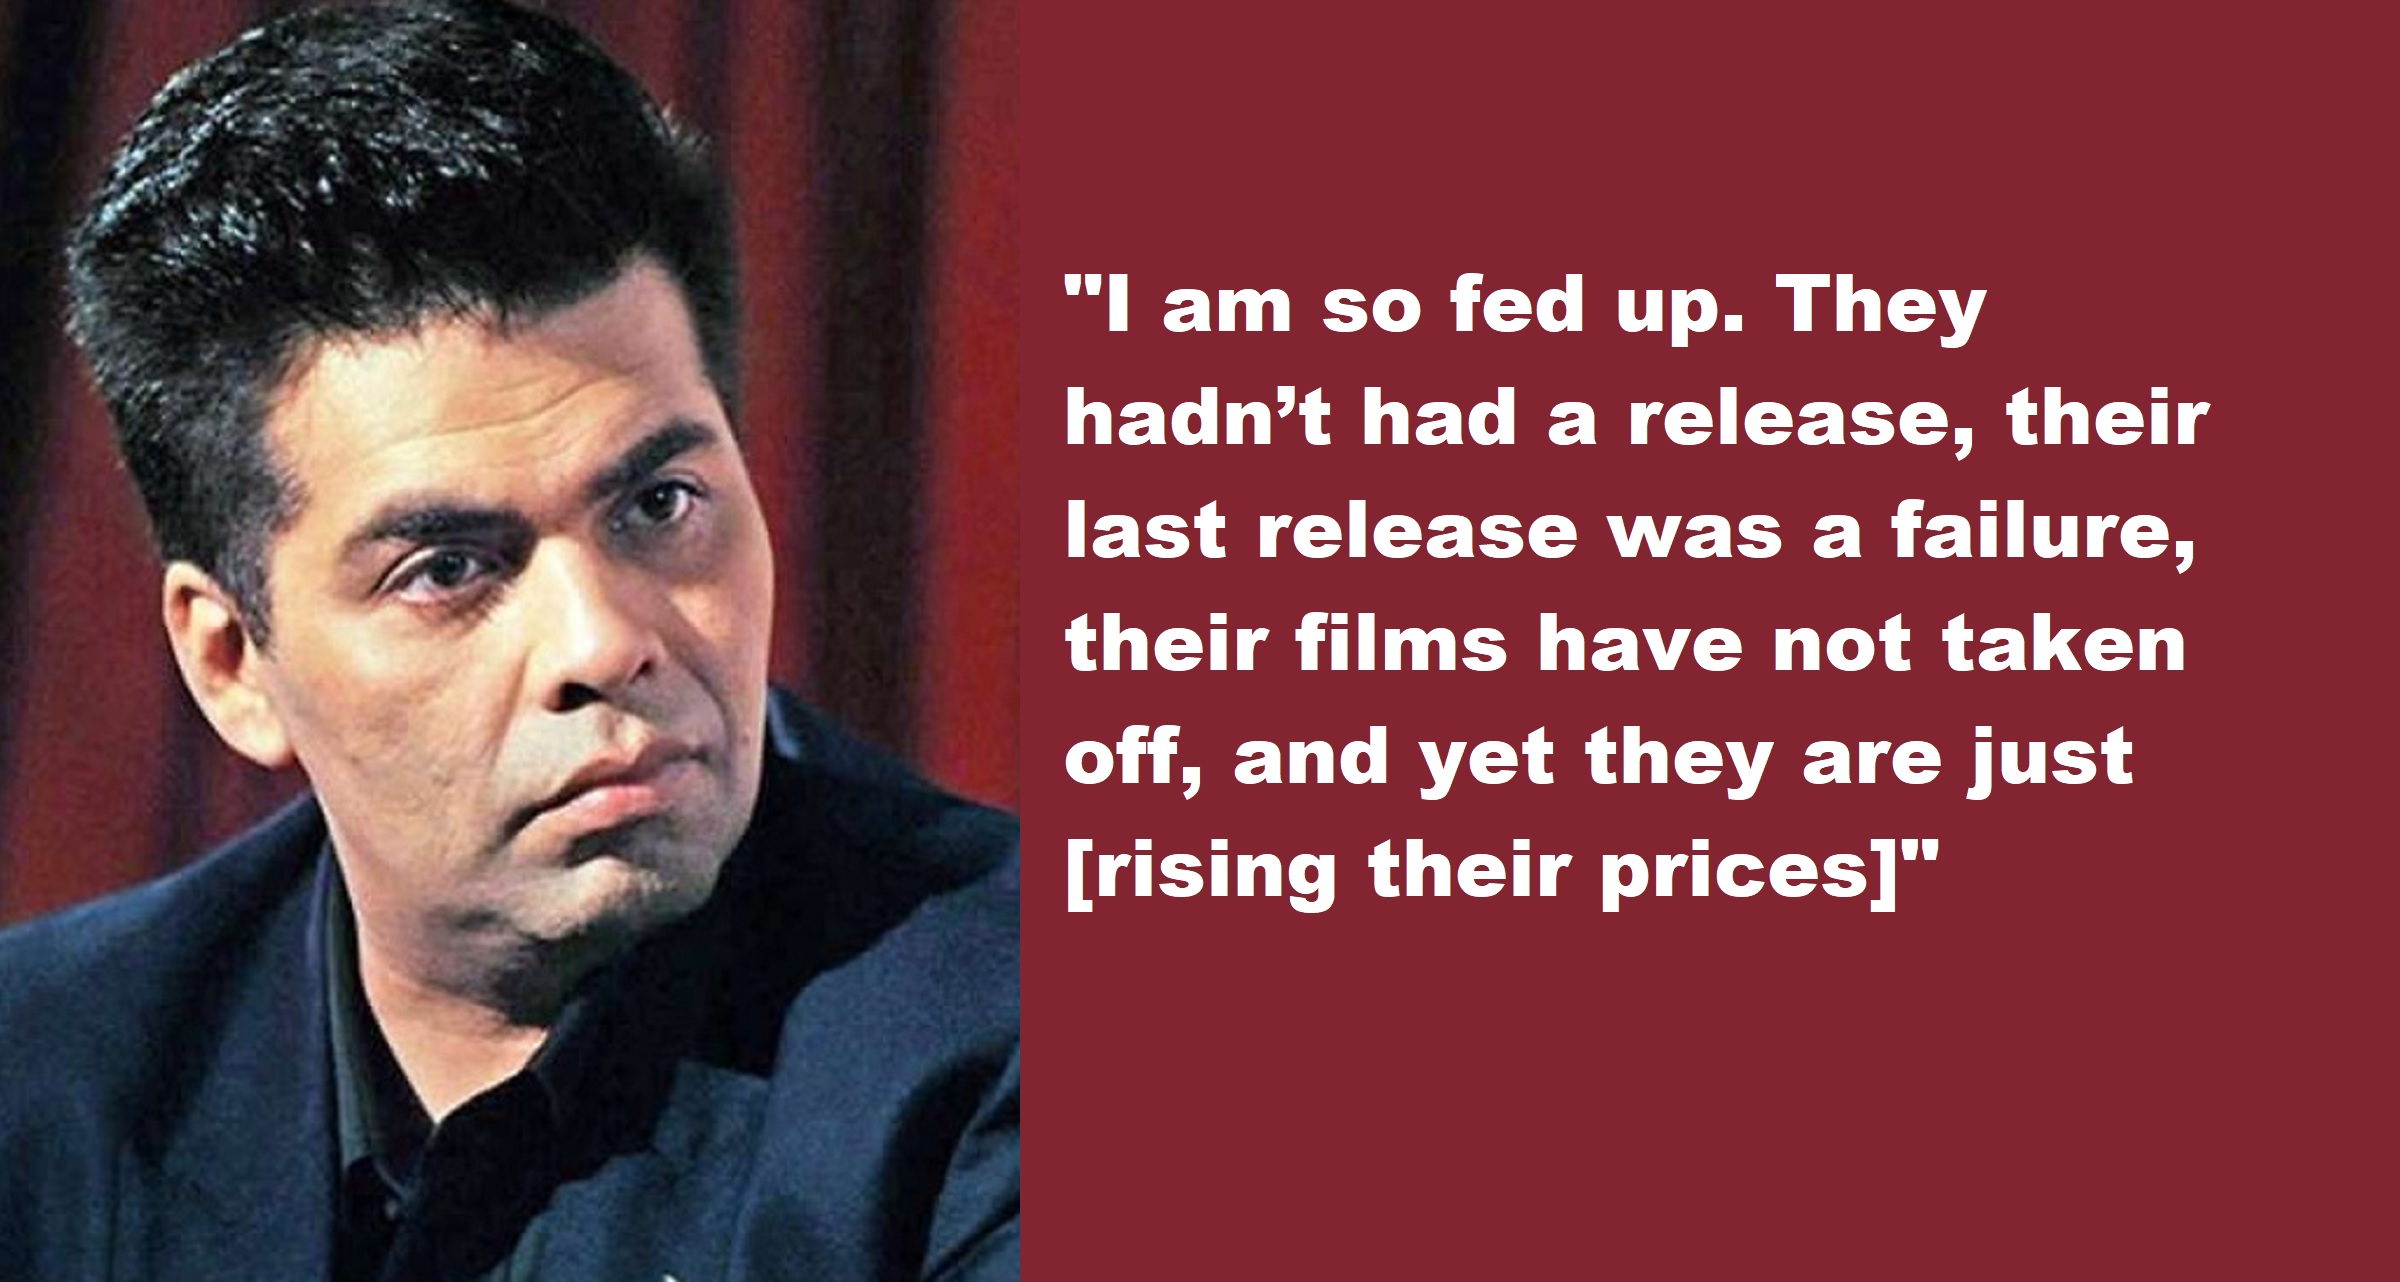 Karan Johar Says He’s ‘Fed Up’ As Newcomers Are Now Asking For Rs 20-30 Crores Per Film